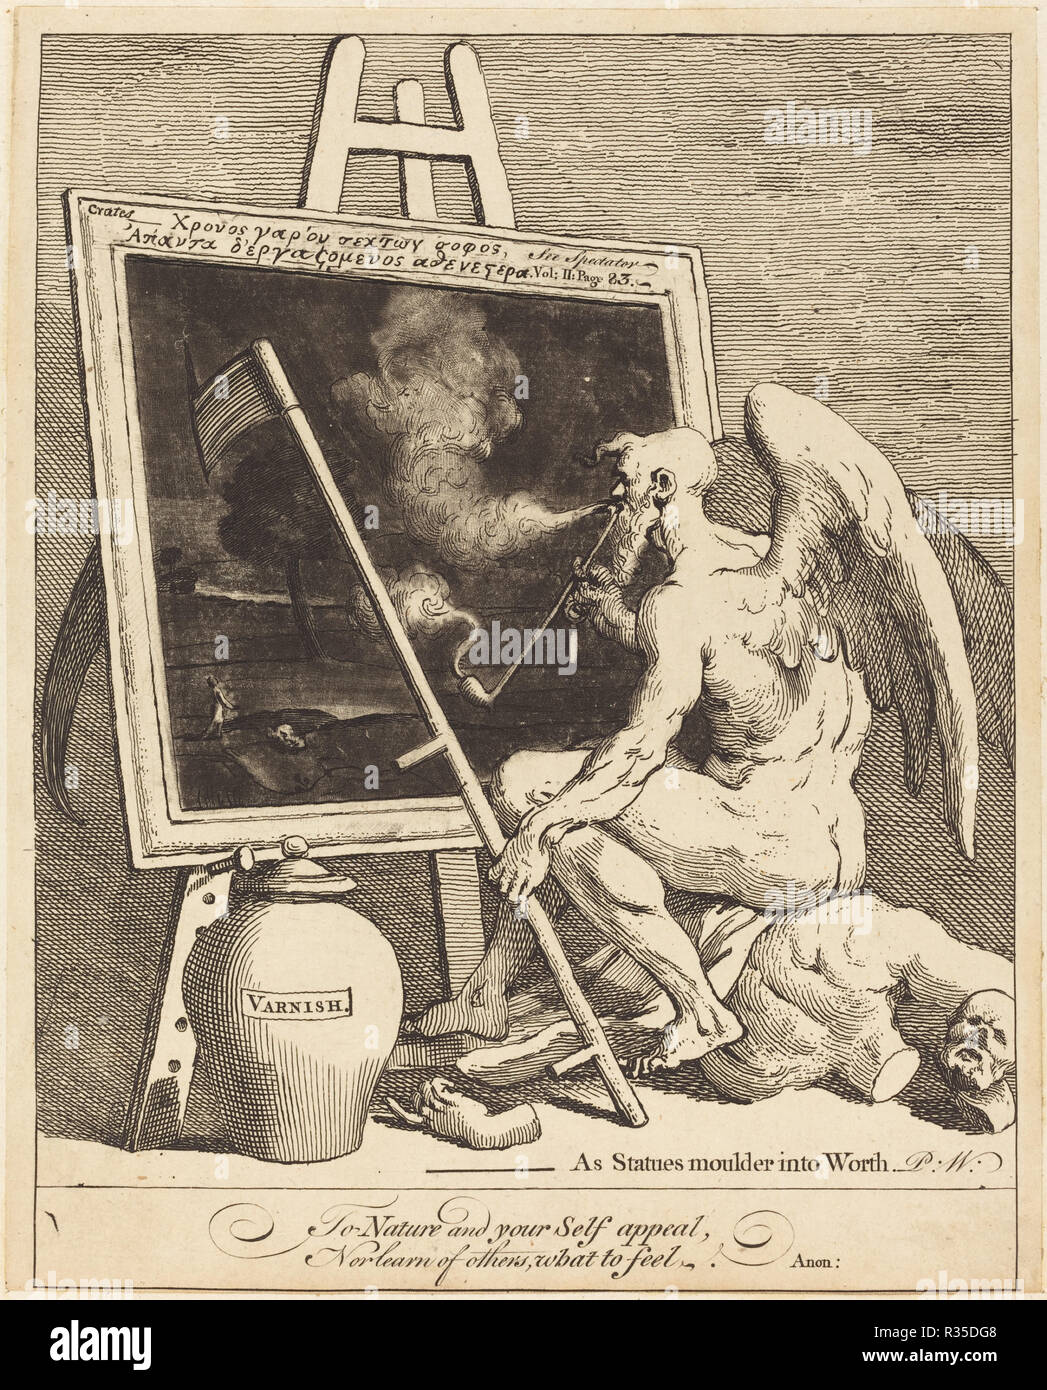 Time Smoking a Picture. Dated: 1761. Dimensions: sheet: 22.5 x 18.1 cm (8 7/8 x 7 1/8 in.). Medium: etching and mezzotint. Museum: National Gallery of Art, Washington DC. Author: William Hogarth. Stock Photo